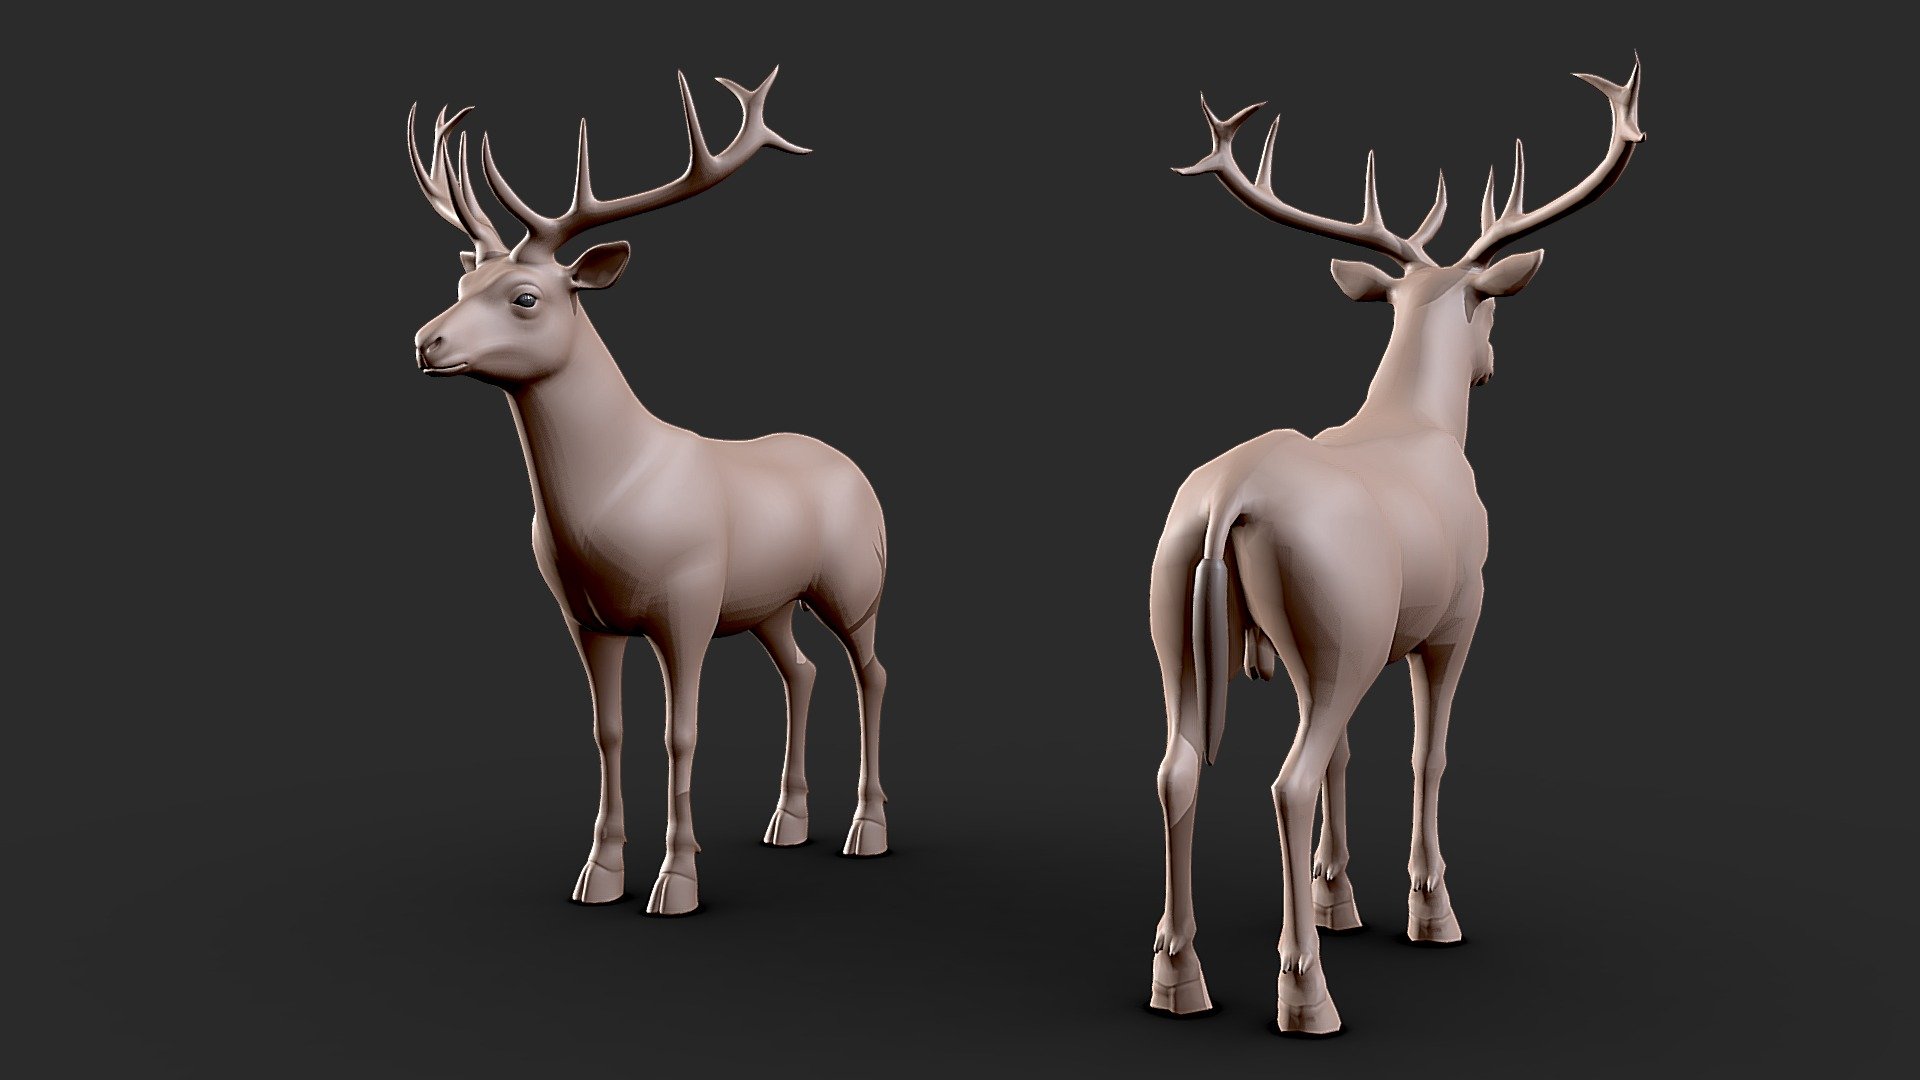 Visit the link to get this model on Artstation:


https://www.artstation.com/a/36228290
Deer character was in maya with proper mesh flow and UVs unwrapped.

File format:





obj




fbx




maya file




Blender file



Inside the product:





clean topology




Single Udim




unwrapped Uvs for texturing




no overlapping UVs




proper naming and grouping




no unwanted shaders and history.



You May also like:


👉 https://skfb.ly/oQ9oN 👈
 - Deer - Topology + UV Map - Buy Royalty Free 3D model by Tashi59 (@tsering) 3d model